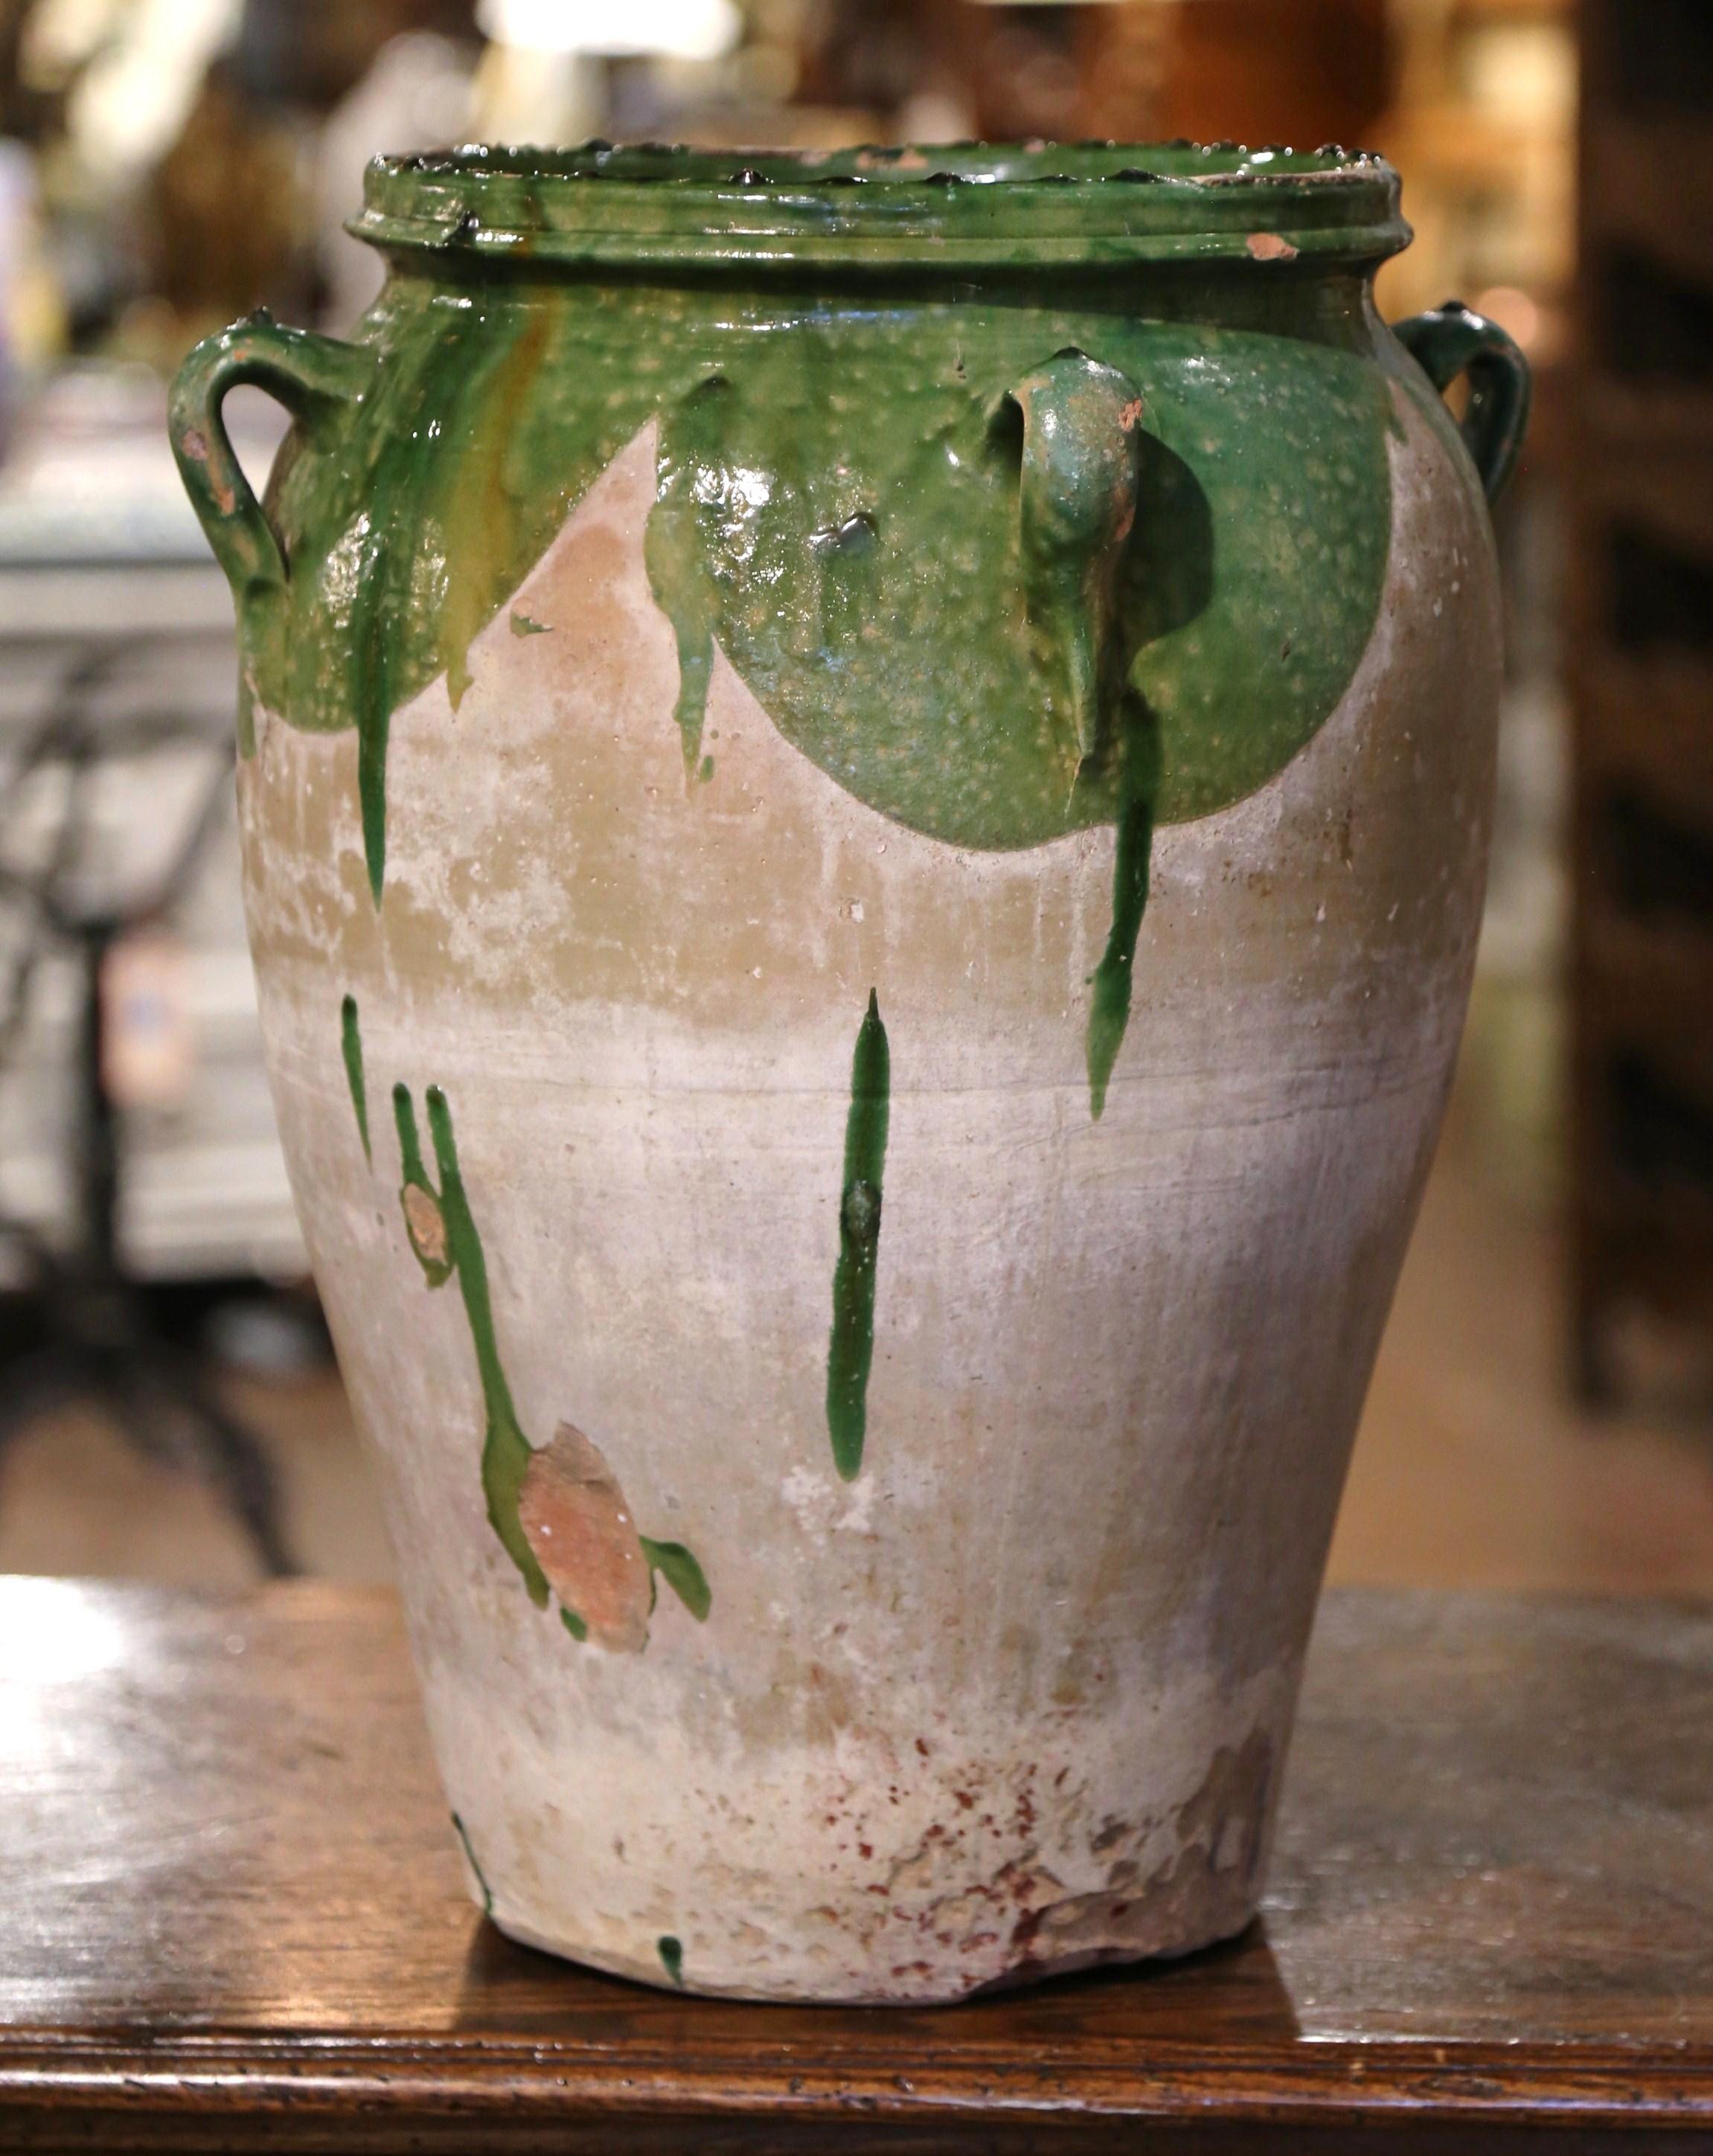 This antique earthenware olive jar was created in Southern France, circa 1780. Made of blond clay and neutral in color, the terracotta vase has a traditional round bulbous shape; it is further dressed with four handles at the shoulder. The rustic,